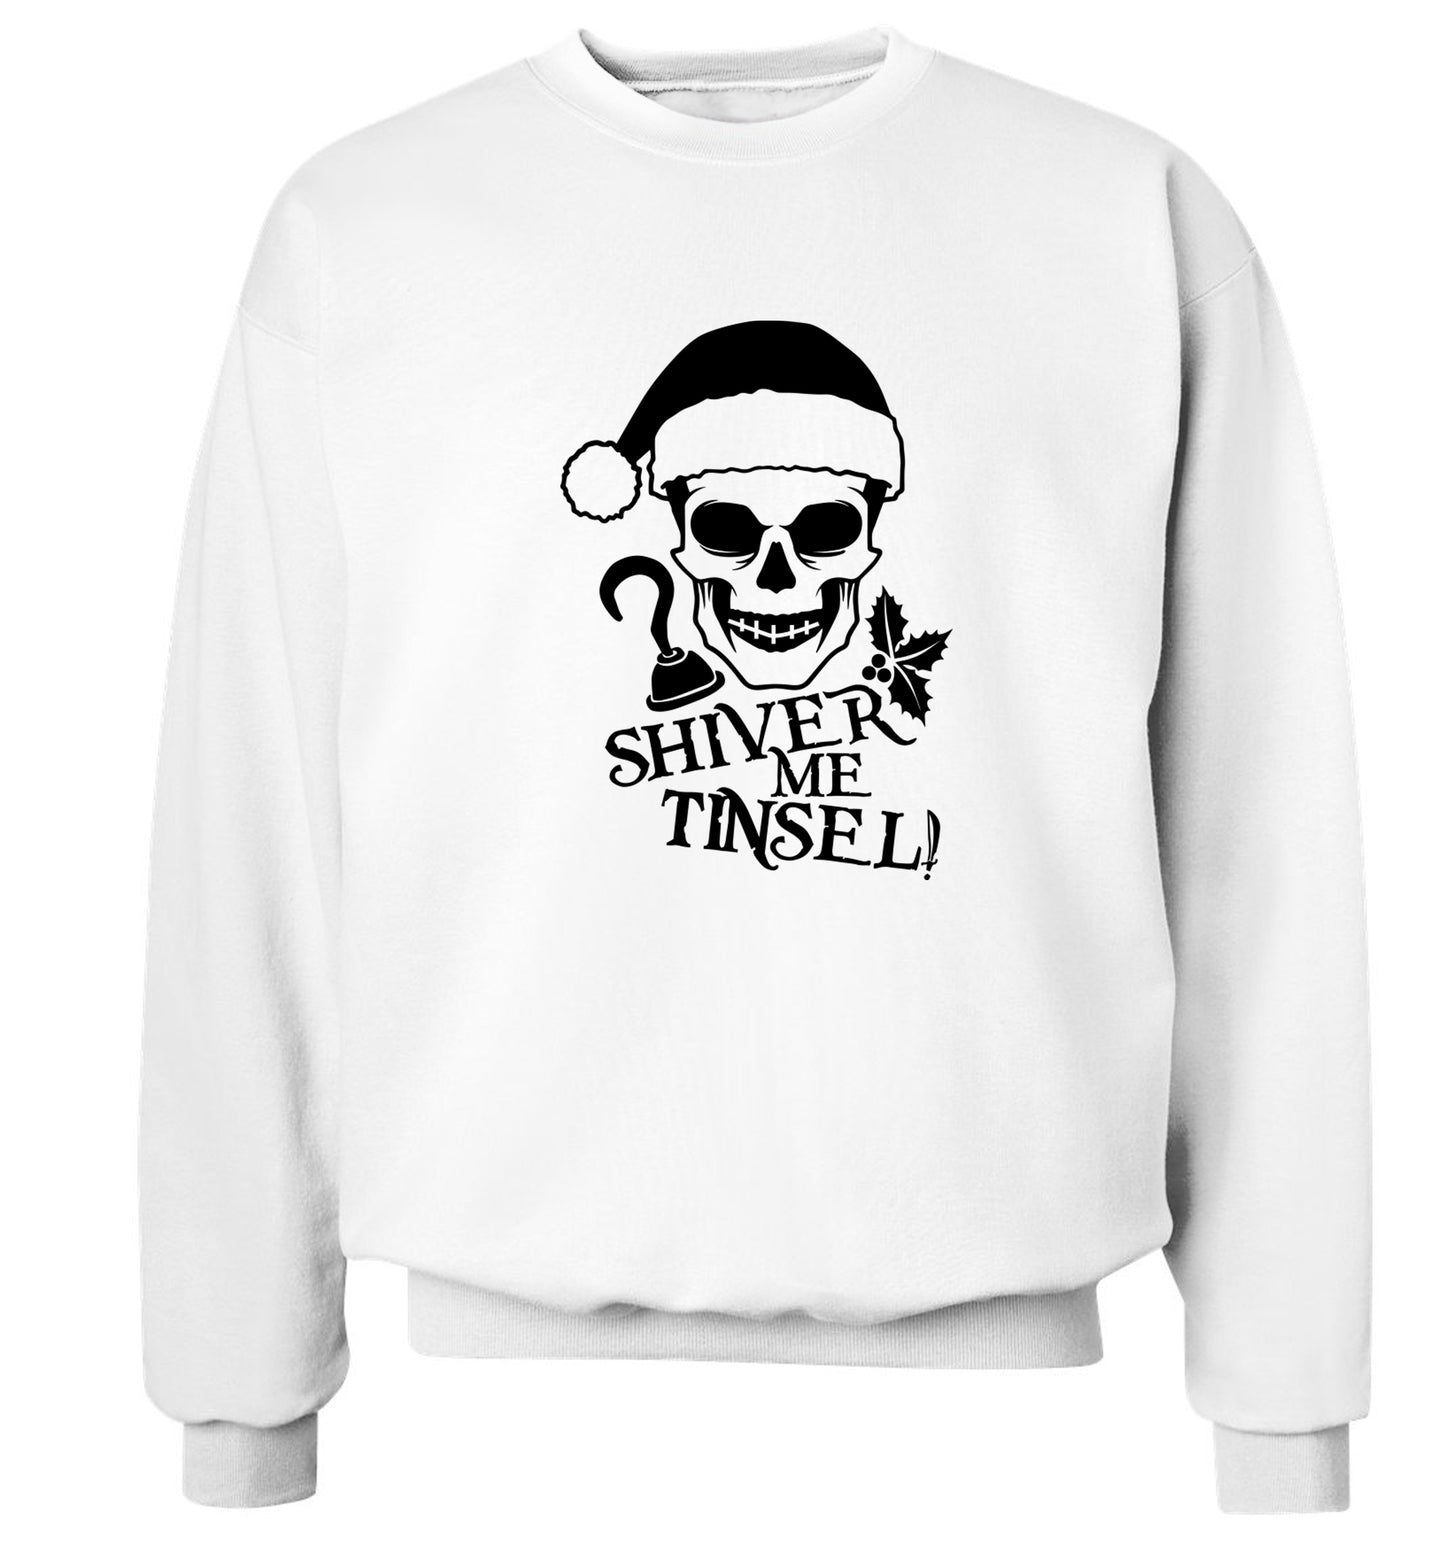 Shiver me tinsel Adult's unisex white Sweater 2XL